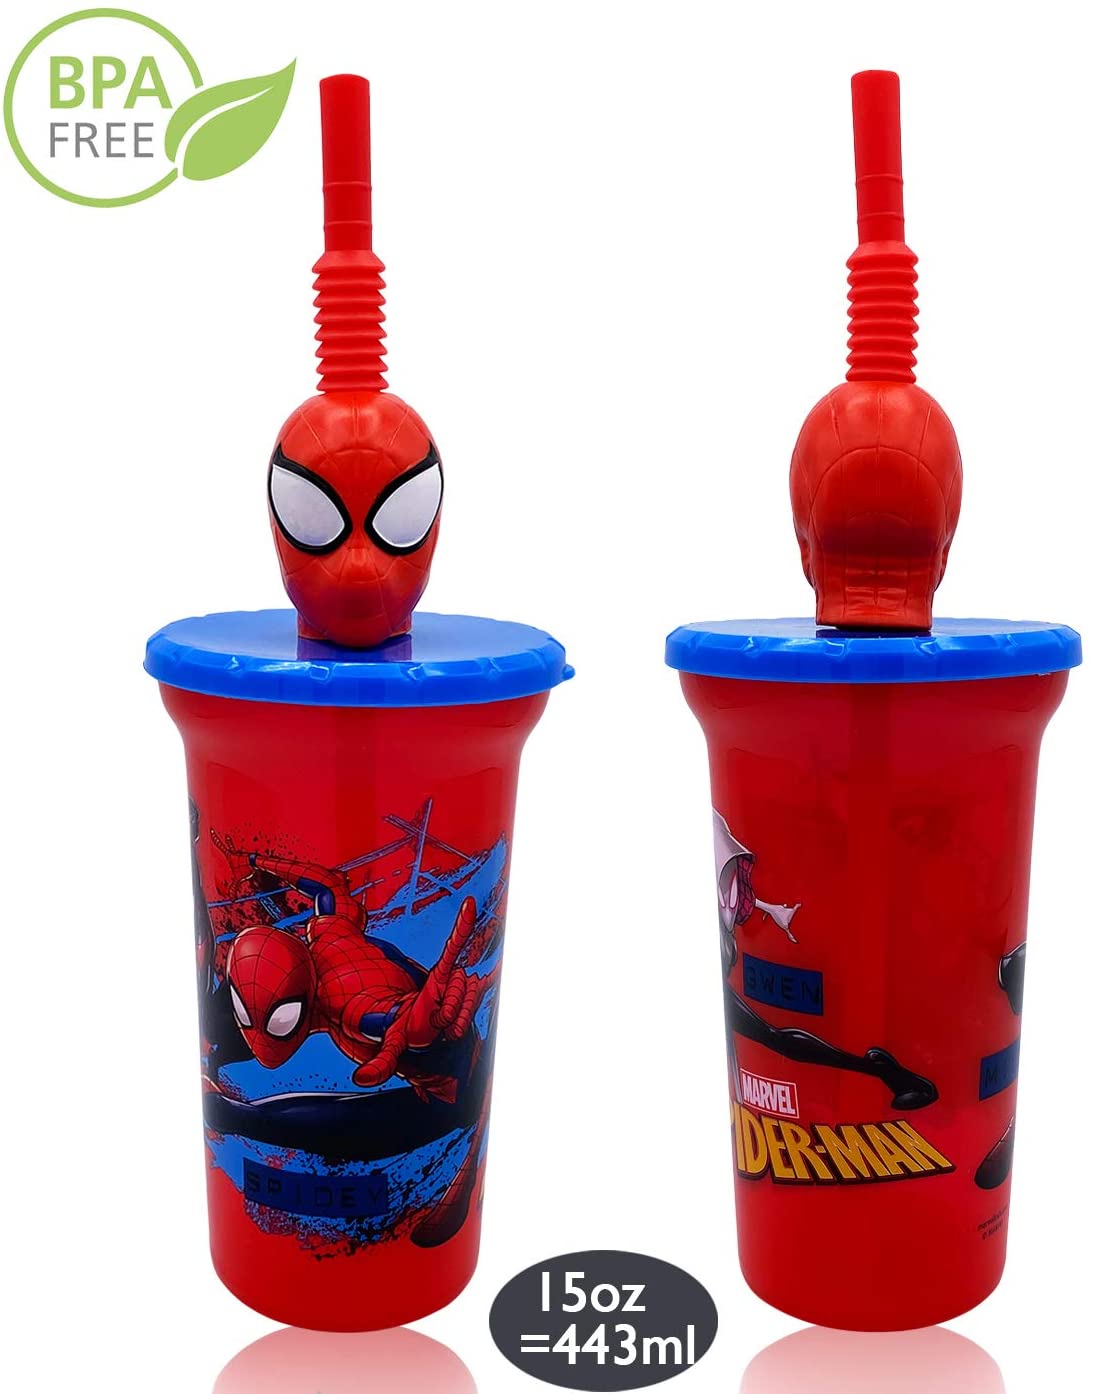 Marvel Super Hero Spiderman Buddy Sips Water Tumbler with 3D Character Head Straw Drinkware - Safe BPA free Bottles, Easy to Clean.